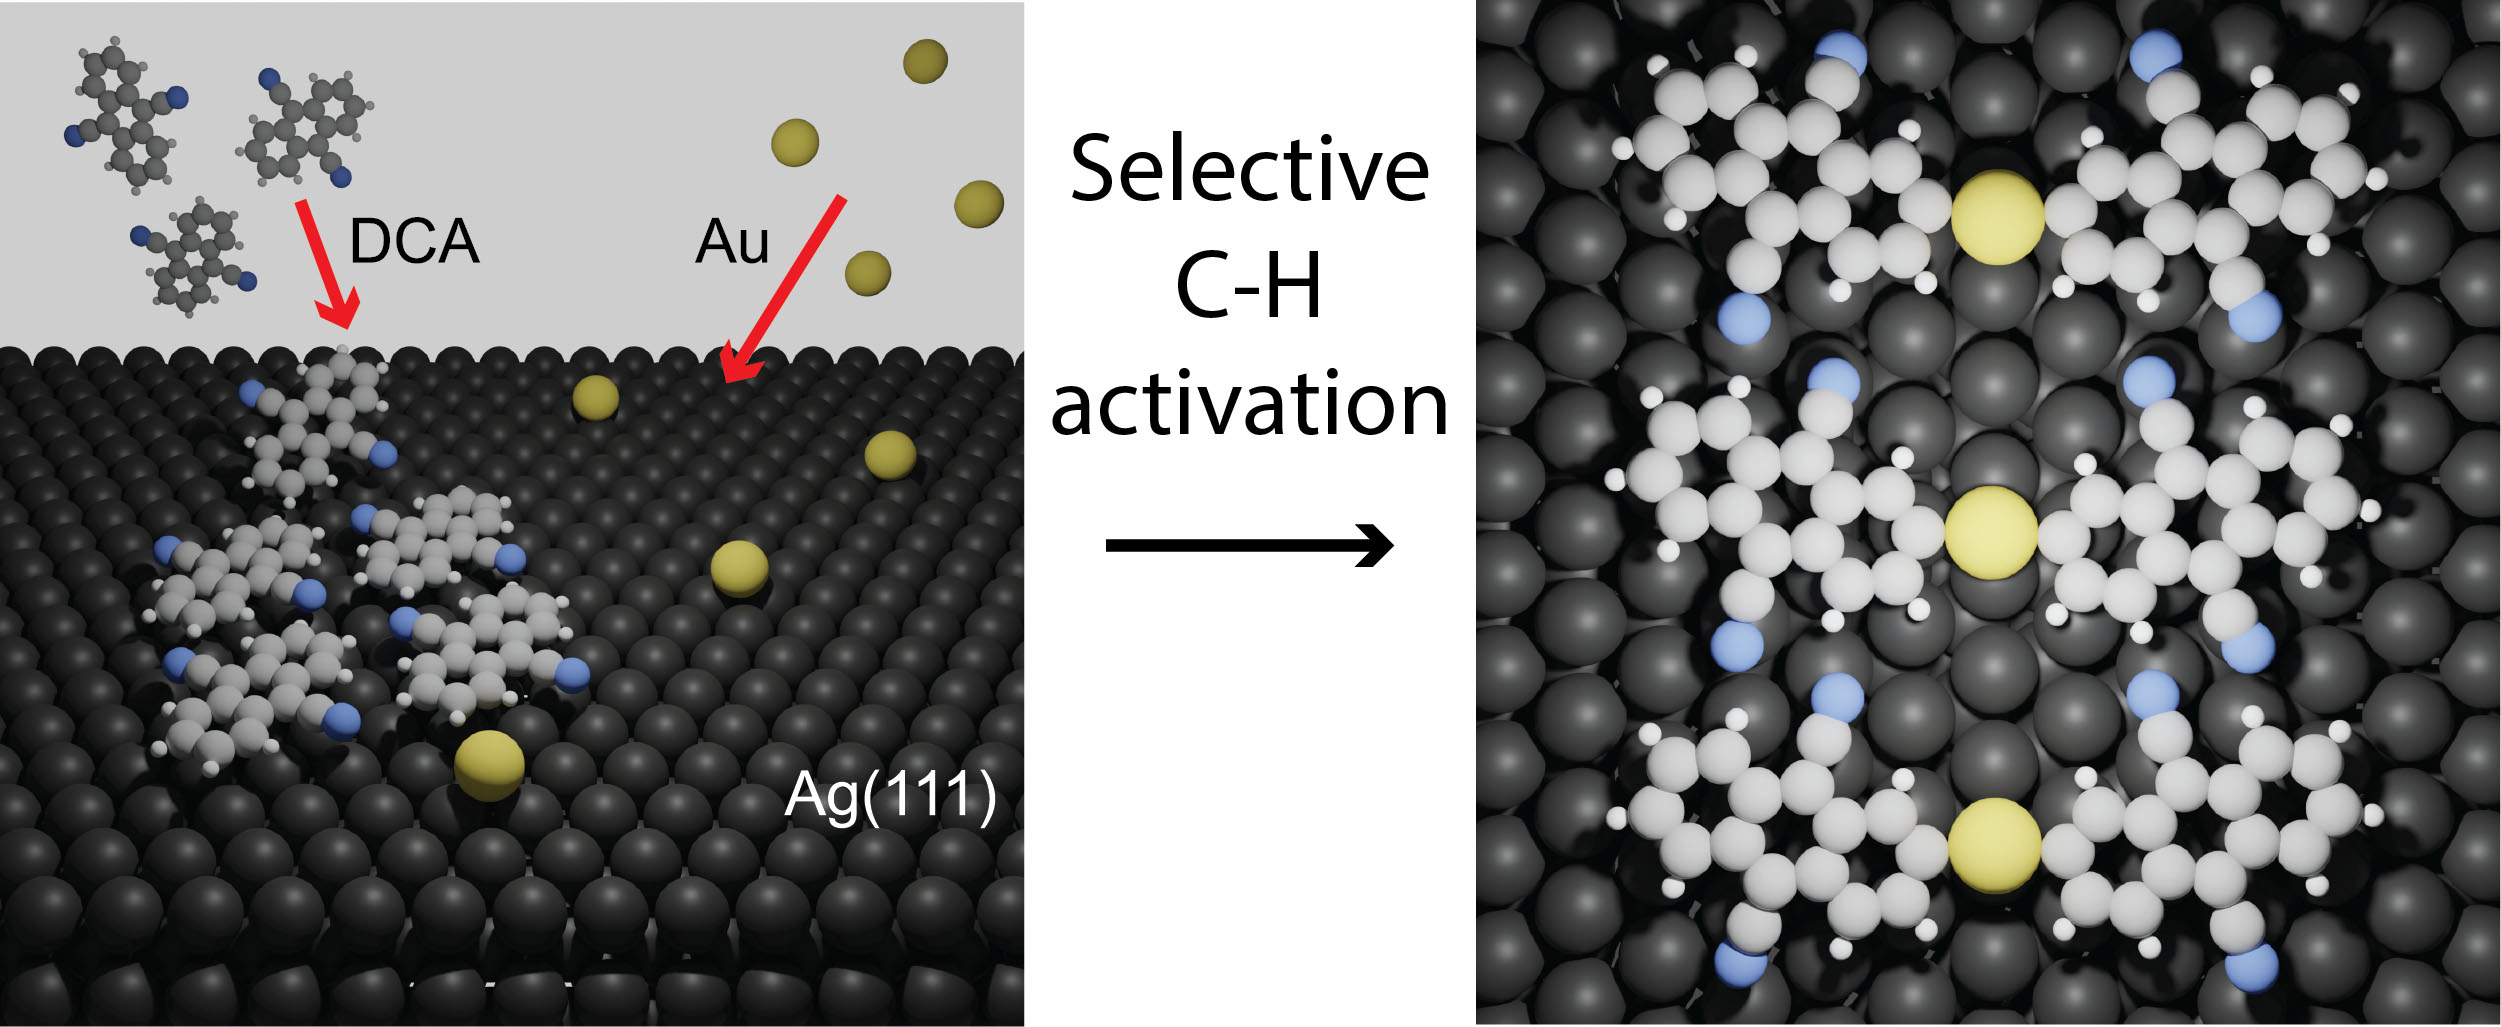 Organic (DCA) molecules combine with gold atoms (Au) on a silver surface, (Ag)